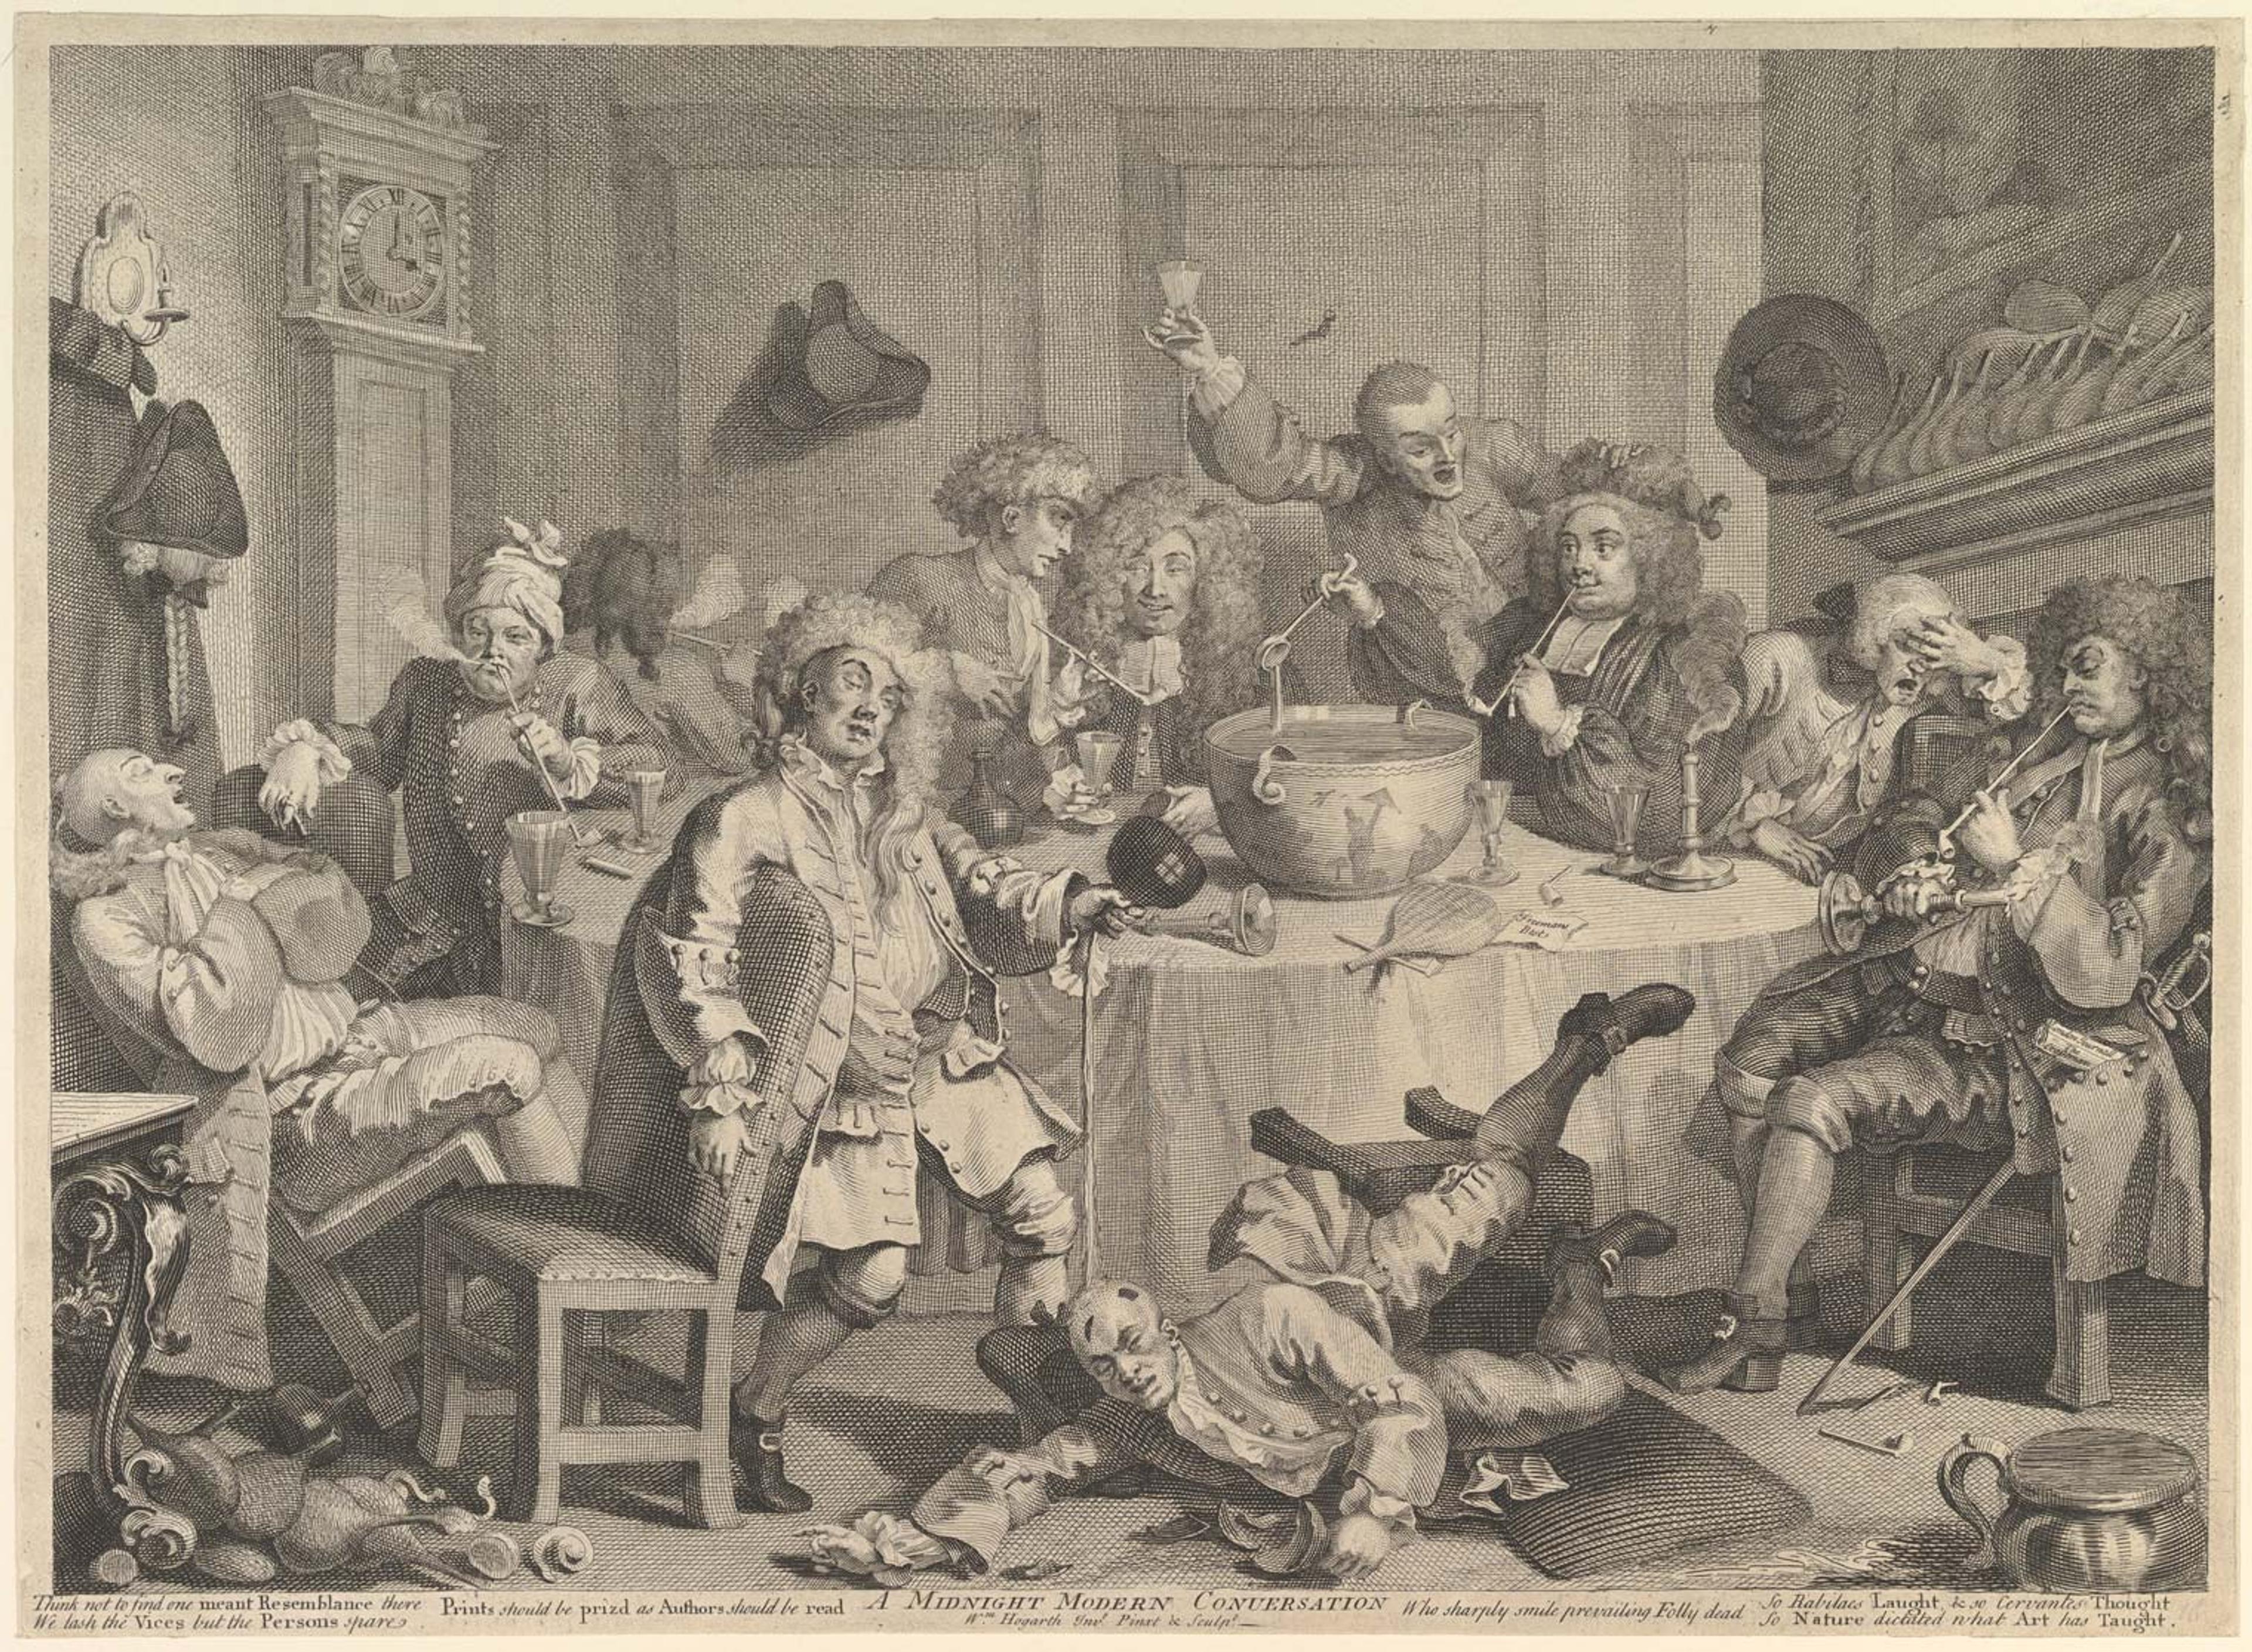 William Hogarth etching from 1732 depicting a group of drunken men at a sporting event